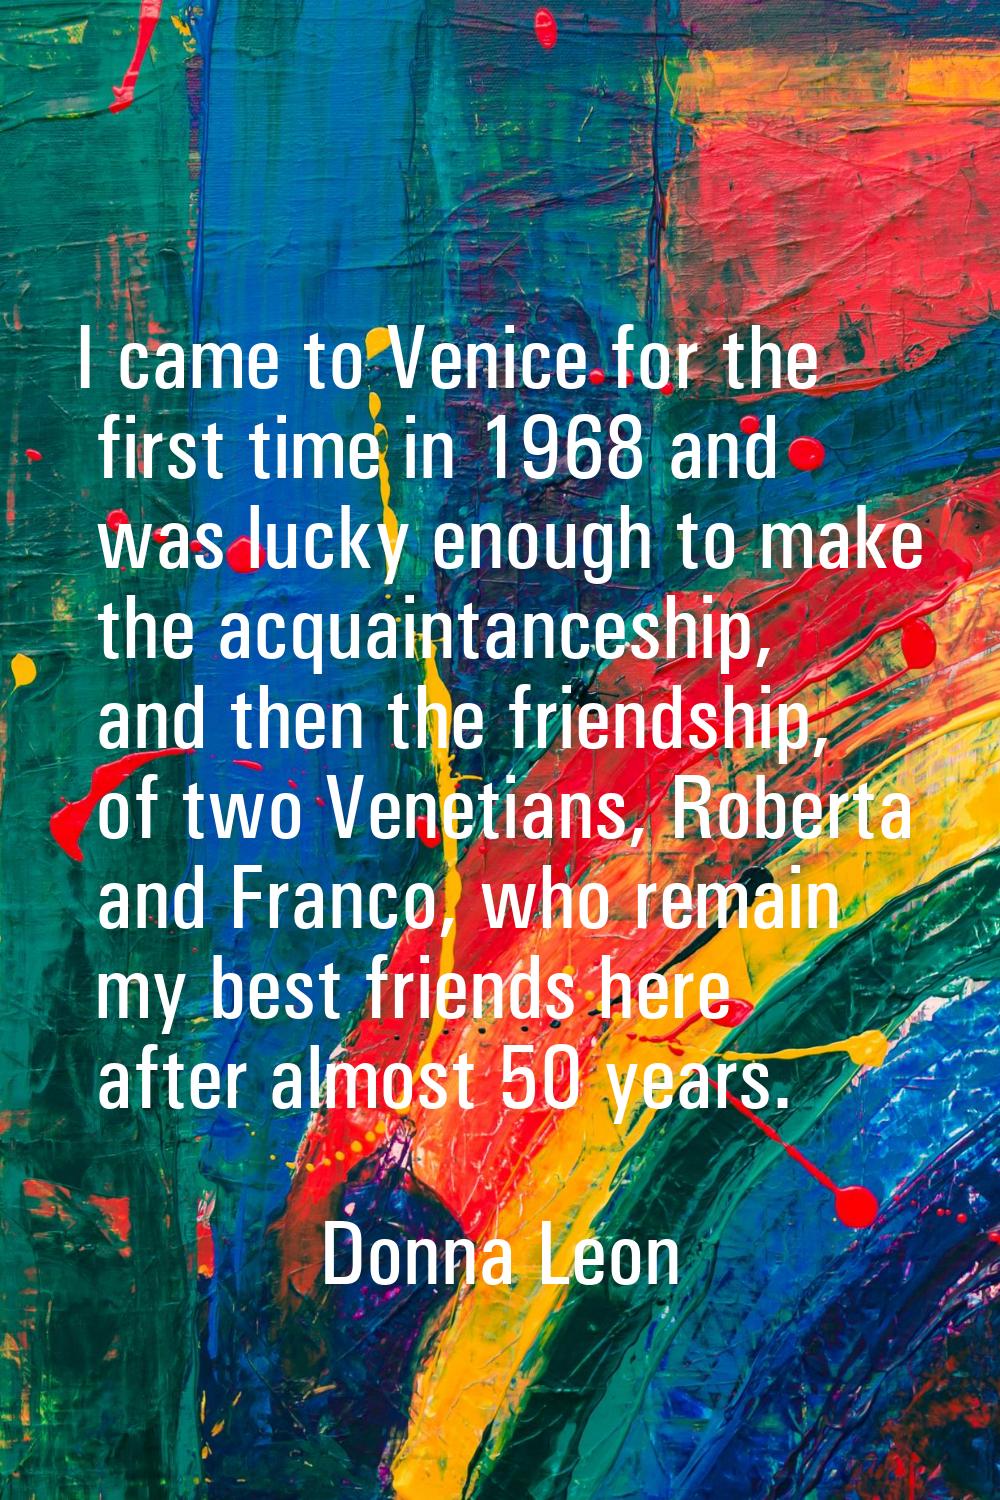 I came to Venice for the first time in 1968 and was lucky enough to make the acquaintanceship, and 